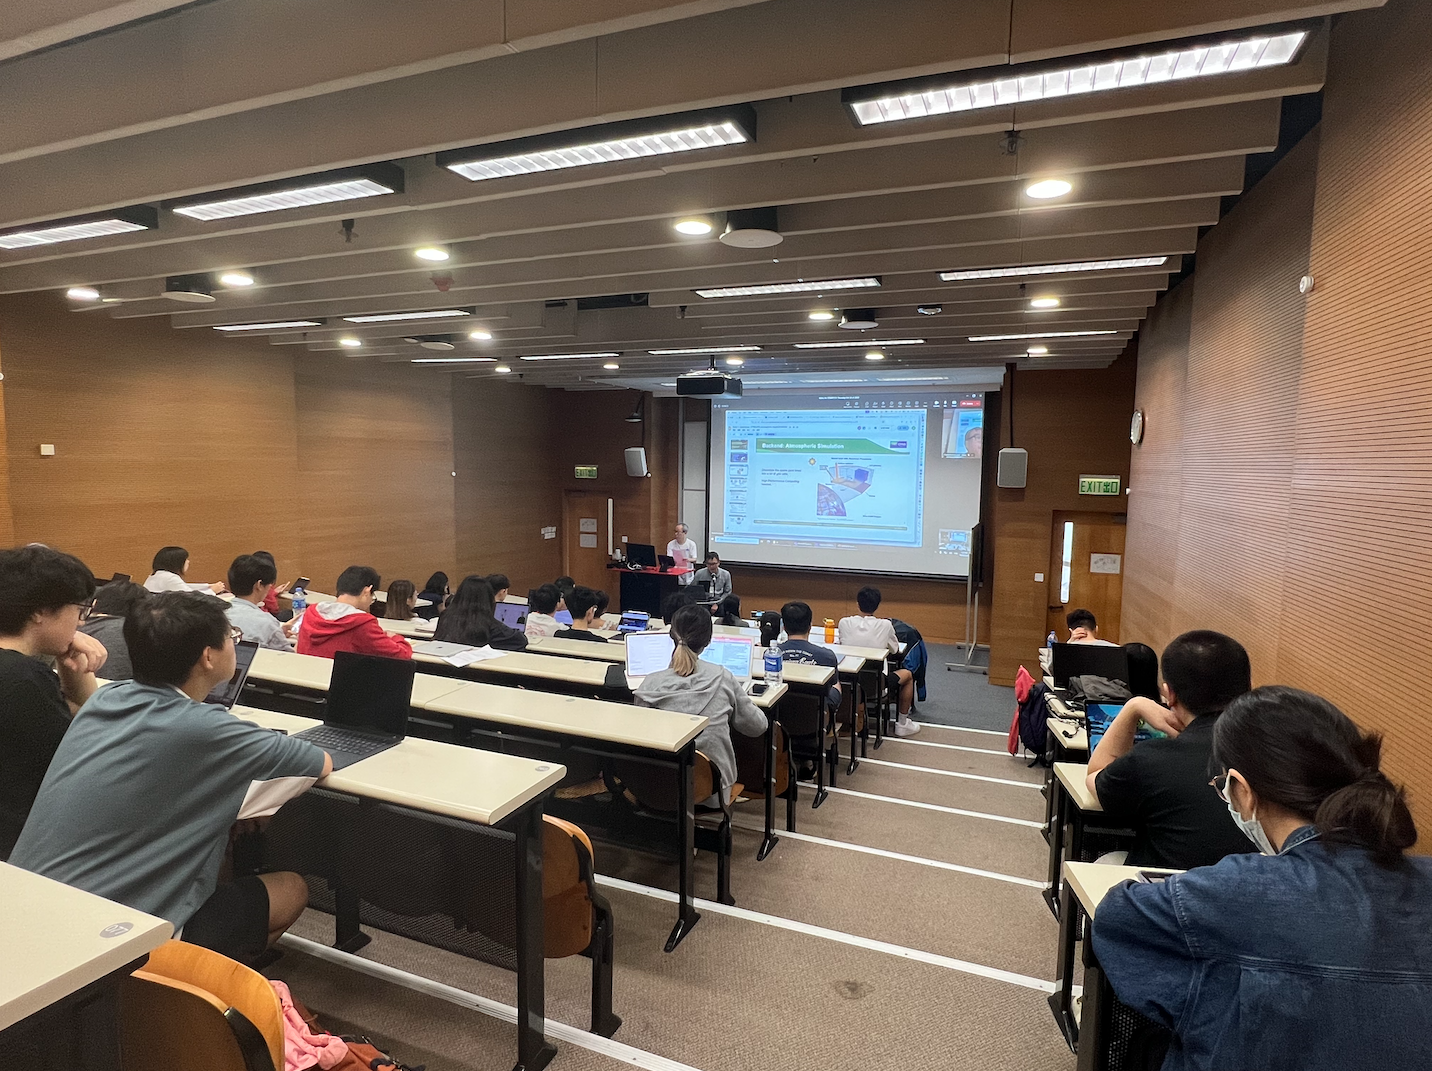  ClusterTech Presented CPAS Atmospheric Model with Insightful Lecture at Hong Kong Polytechnic University